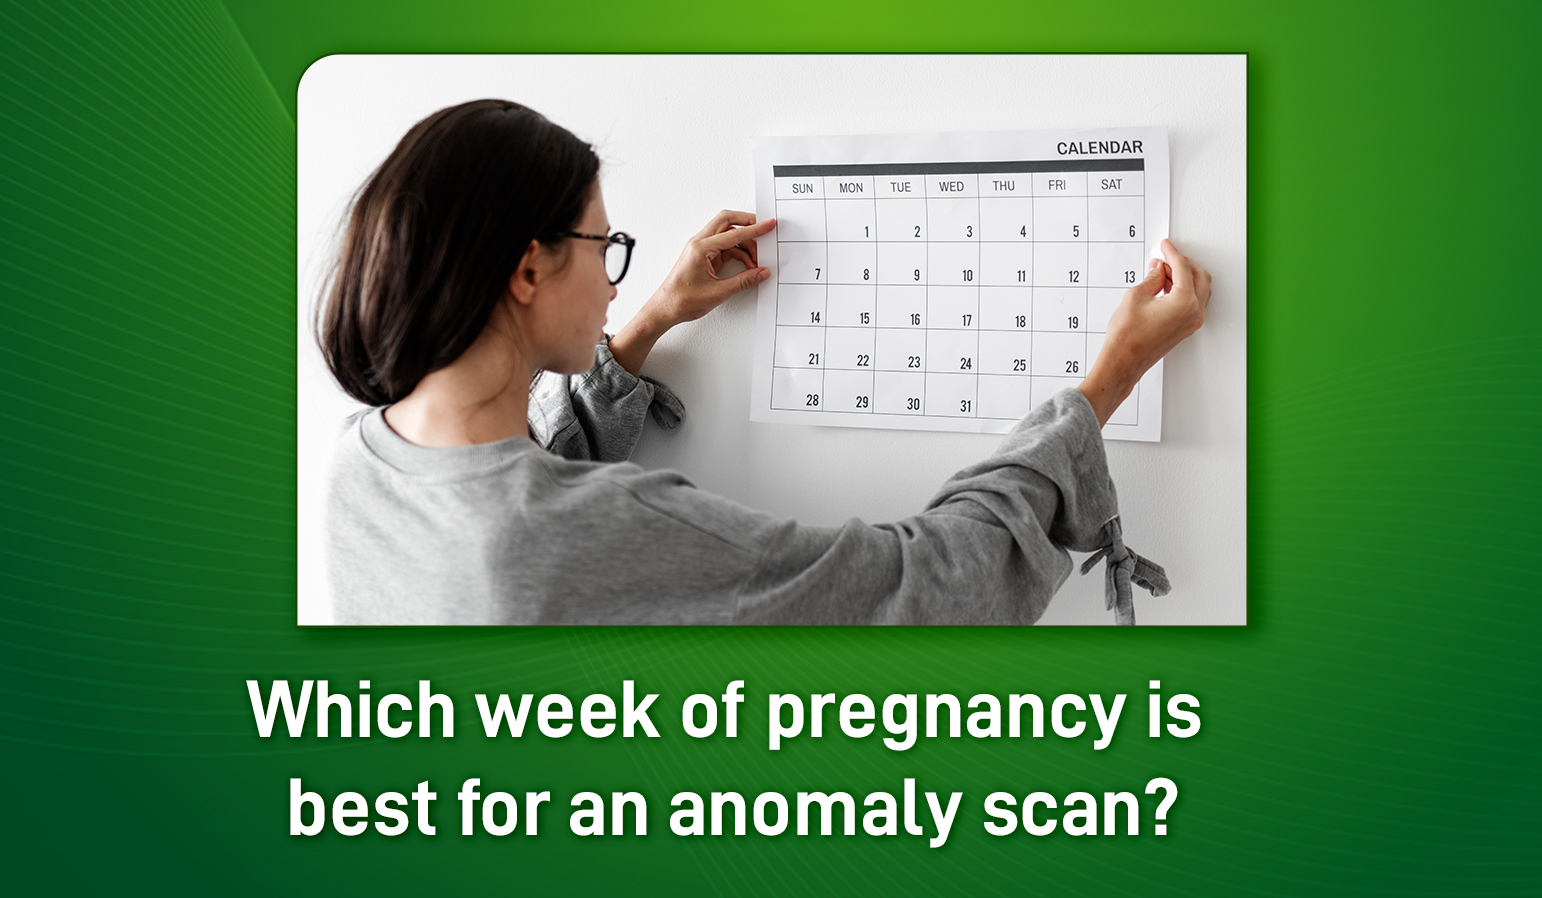 which week of pregnancy is best for anomaly scan